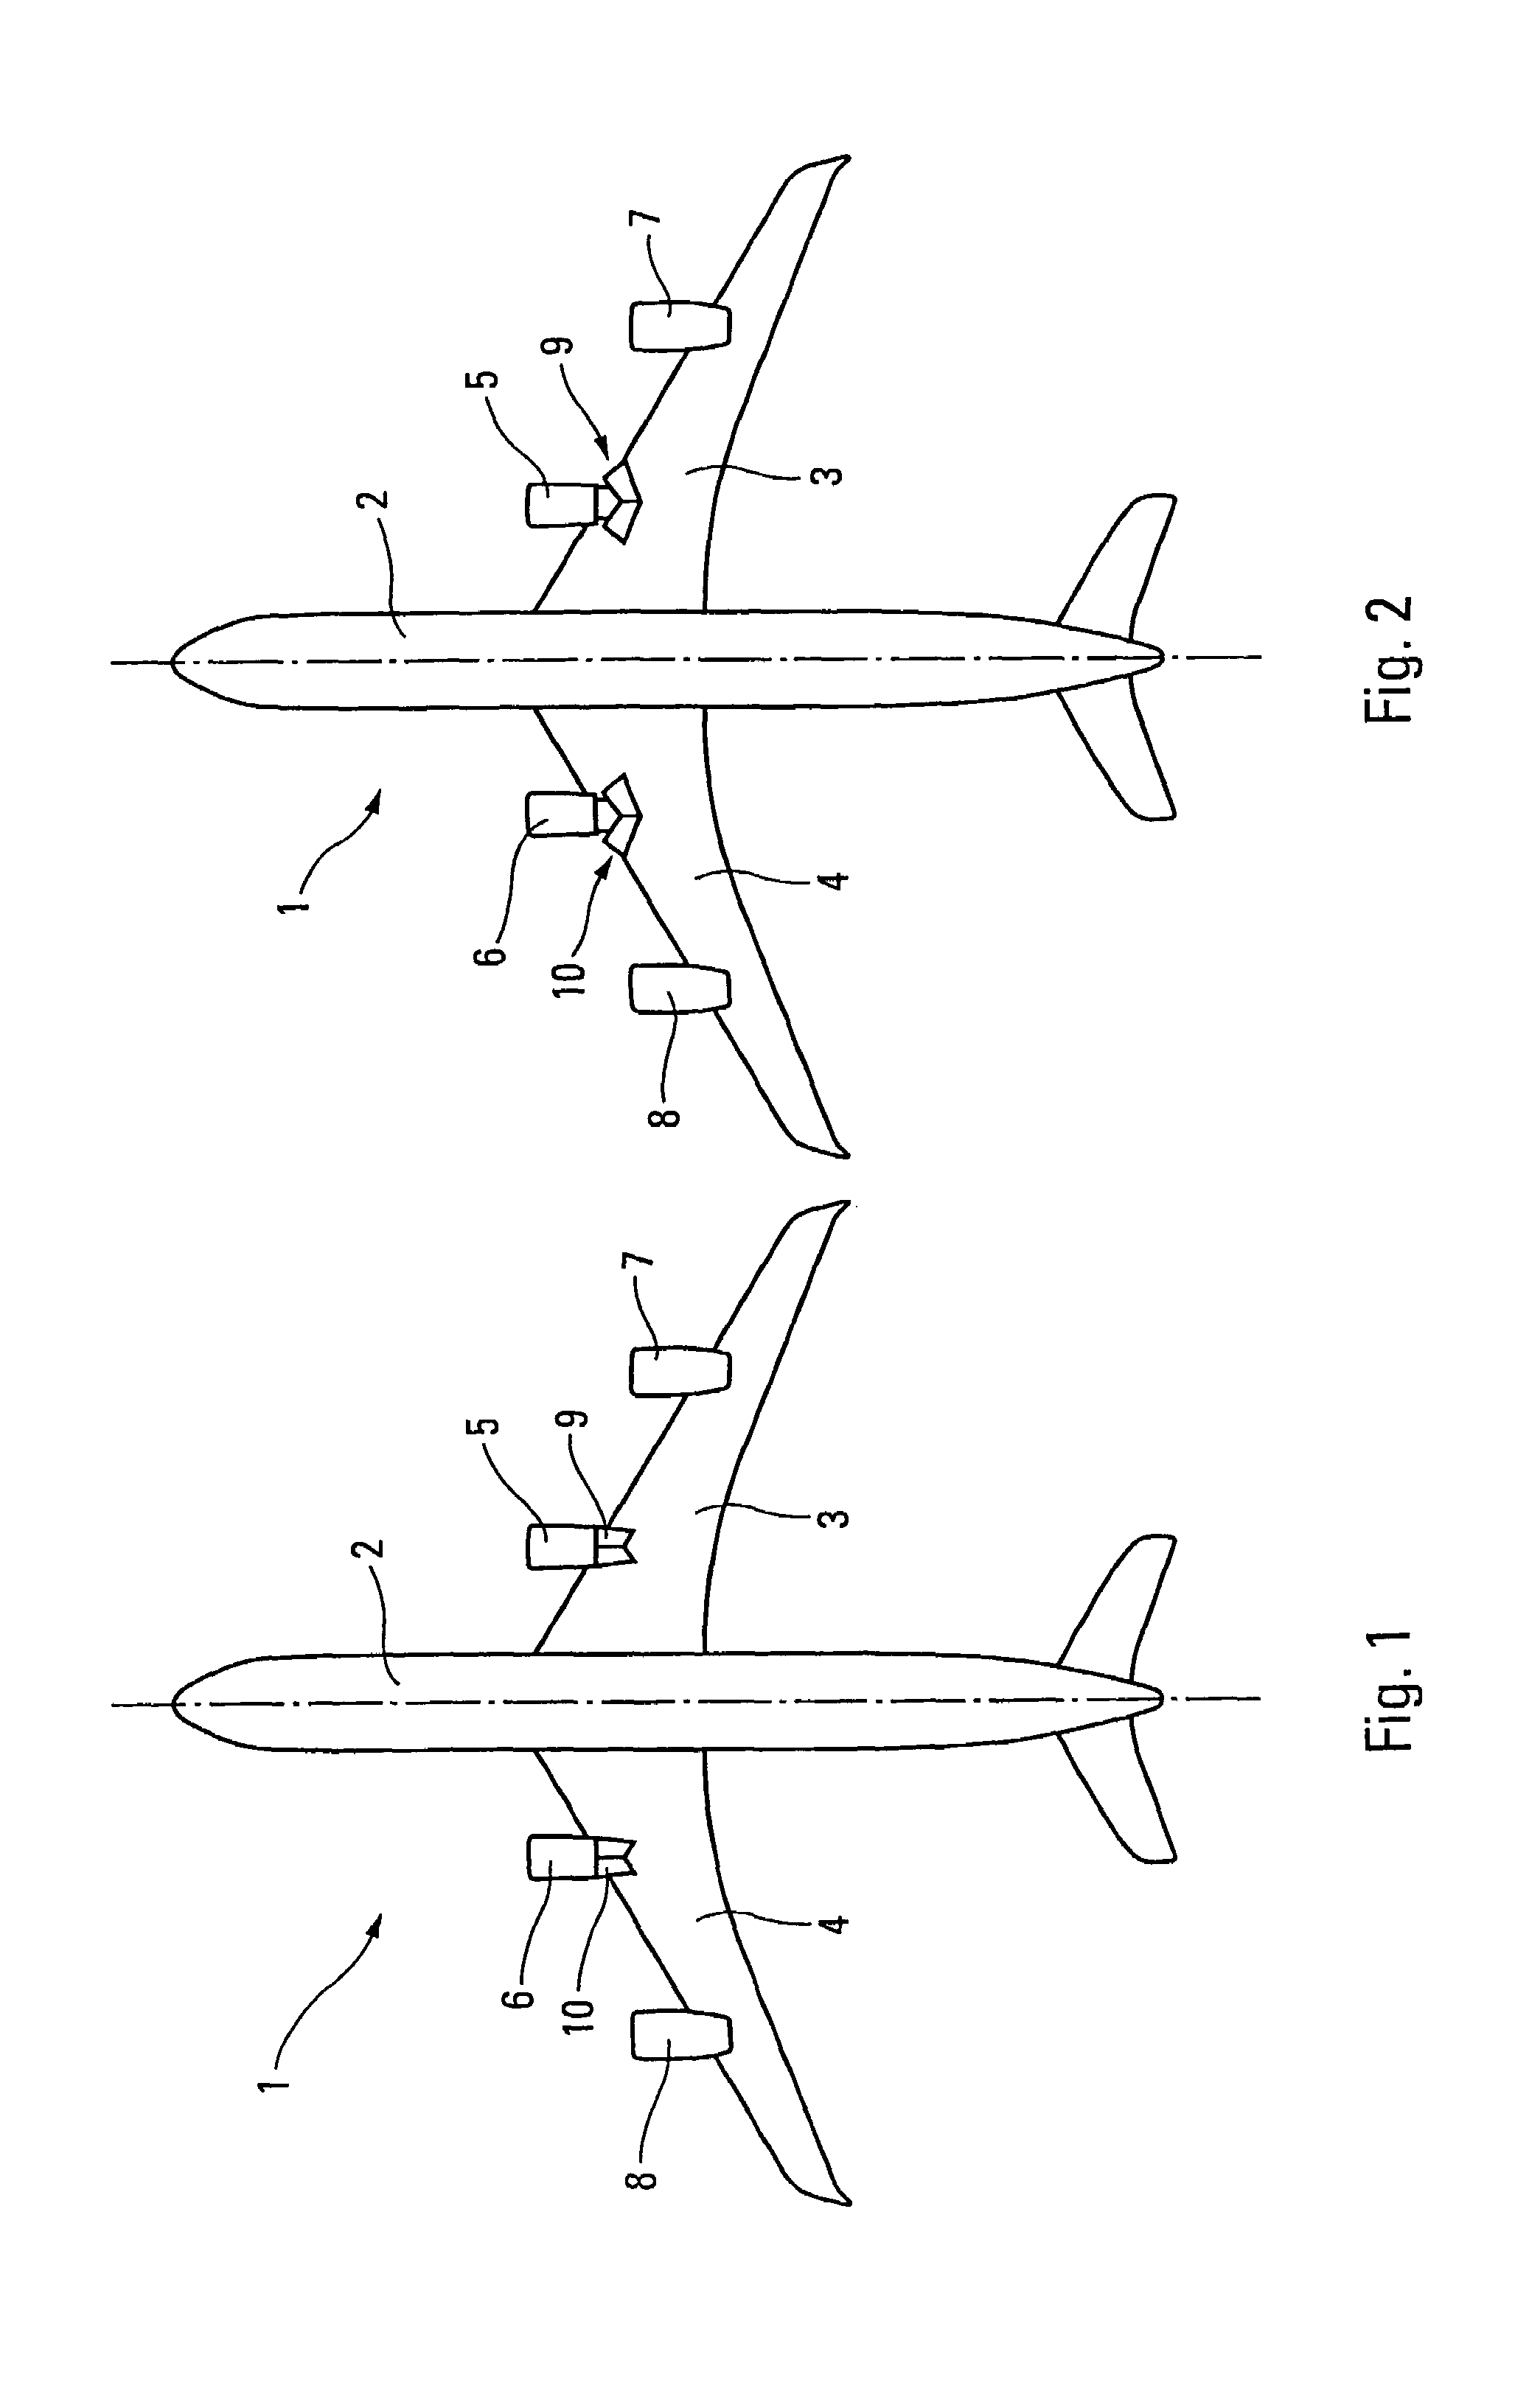 Aircraft provided with thrust reversers